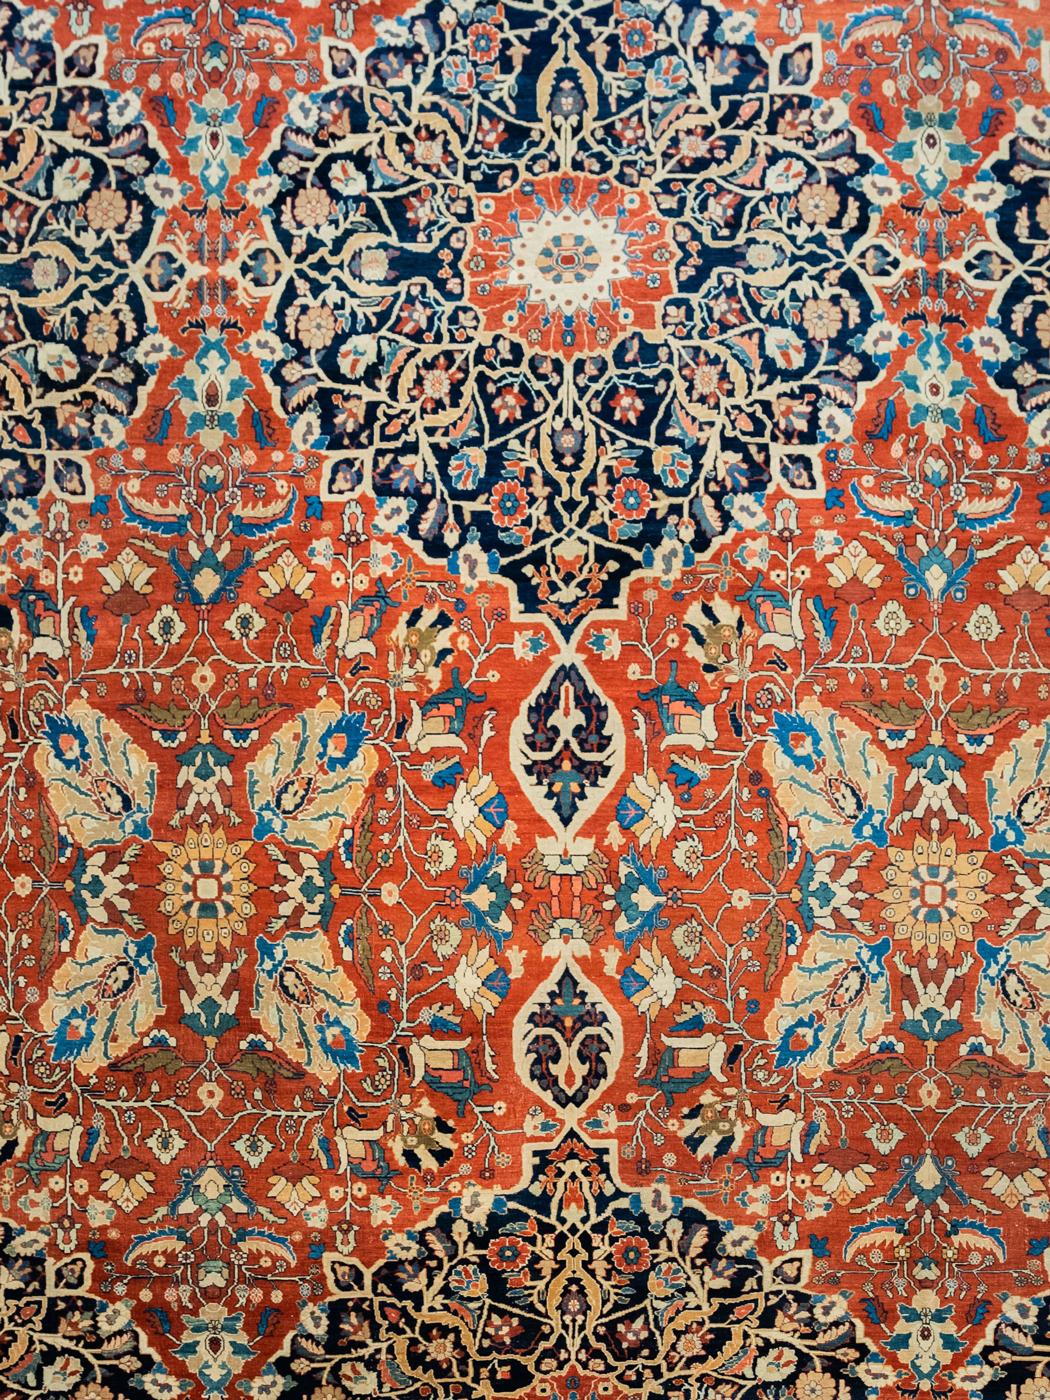 In classic and vibrant shades of bright red, cream, indigo, and black wool, this multi-colored Farahan carpet measures 12’3” x 17”, and was woven circa 1880. Constructed with a traditional Persian weave on a cotton foundation, this carpet’s pile